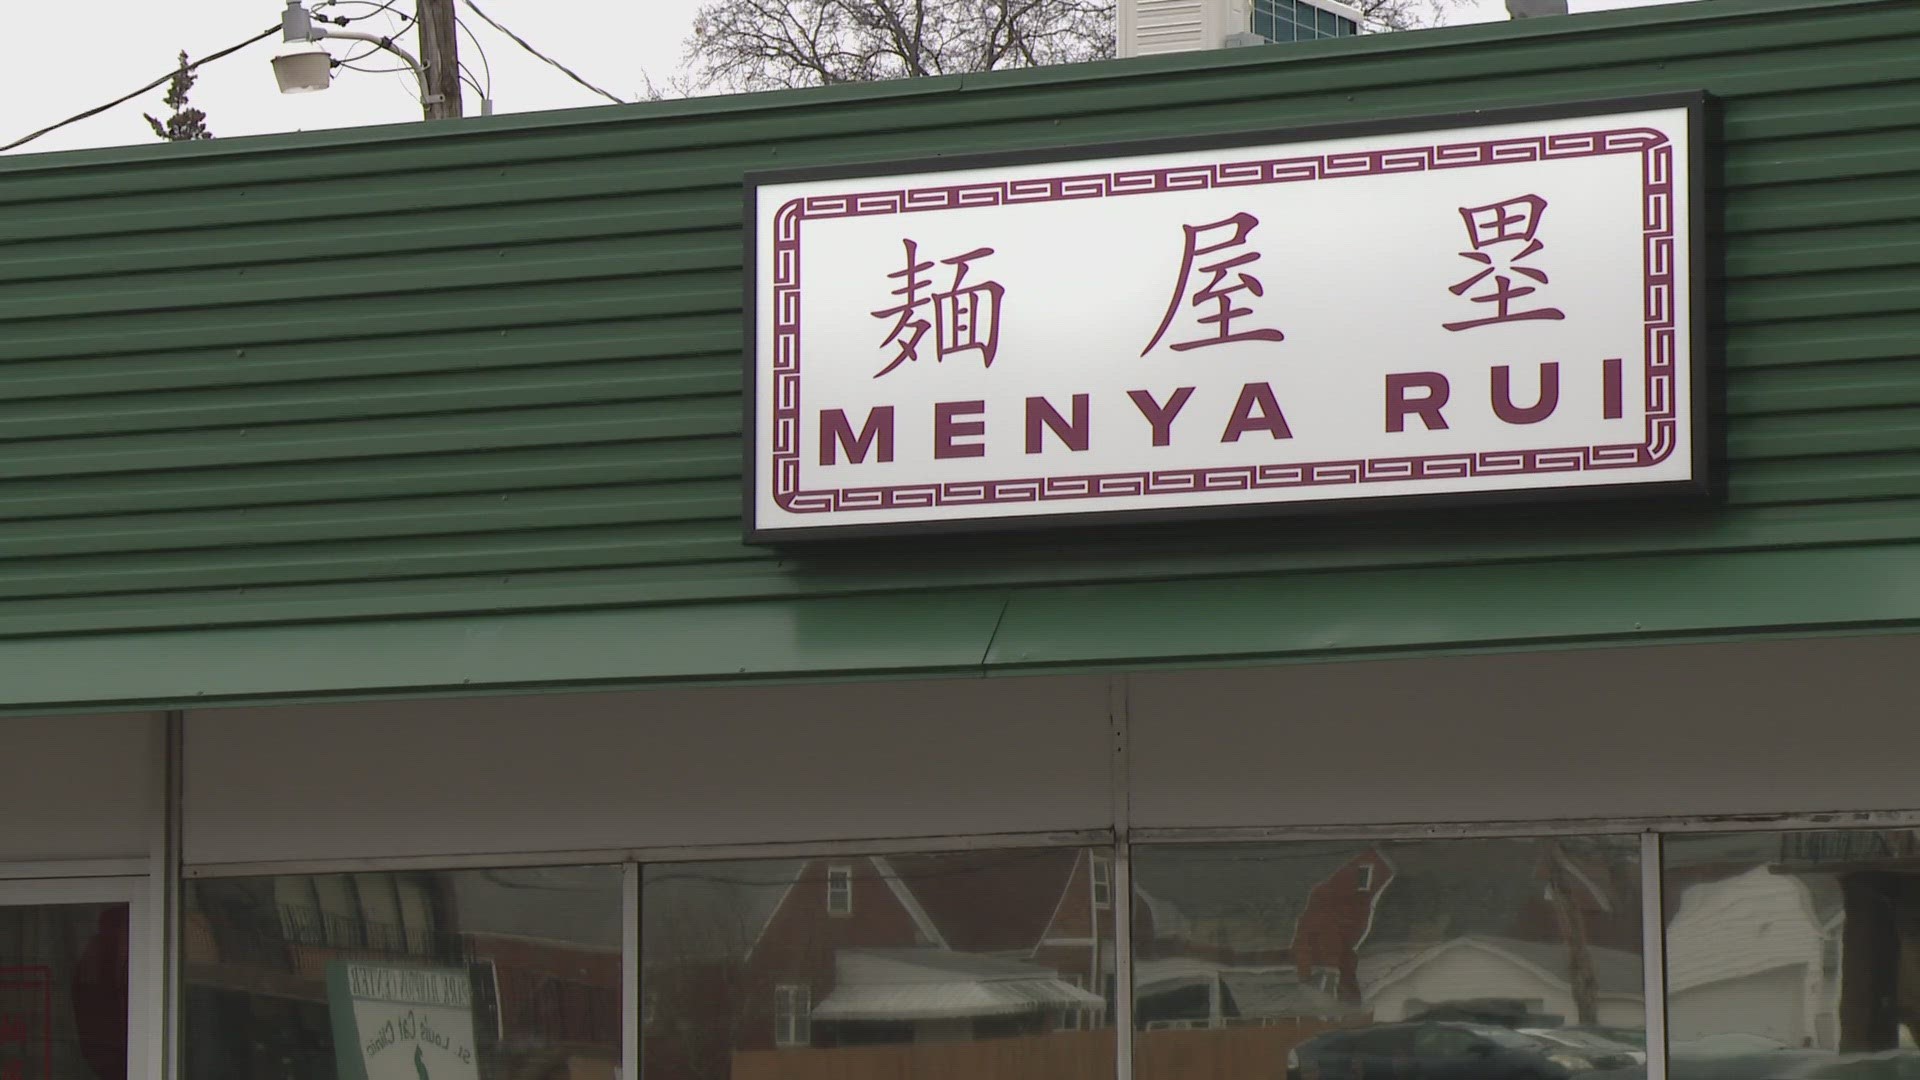 Chef Steven Pursley, the owner of Menya Rui, is a native of St. Louis.